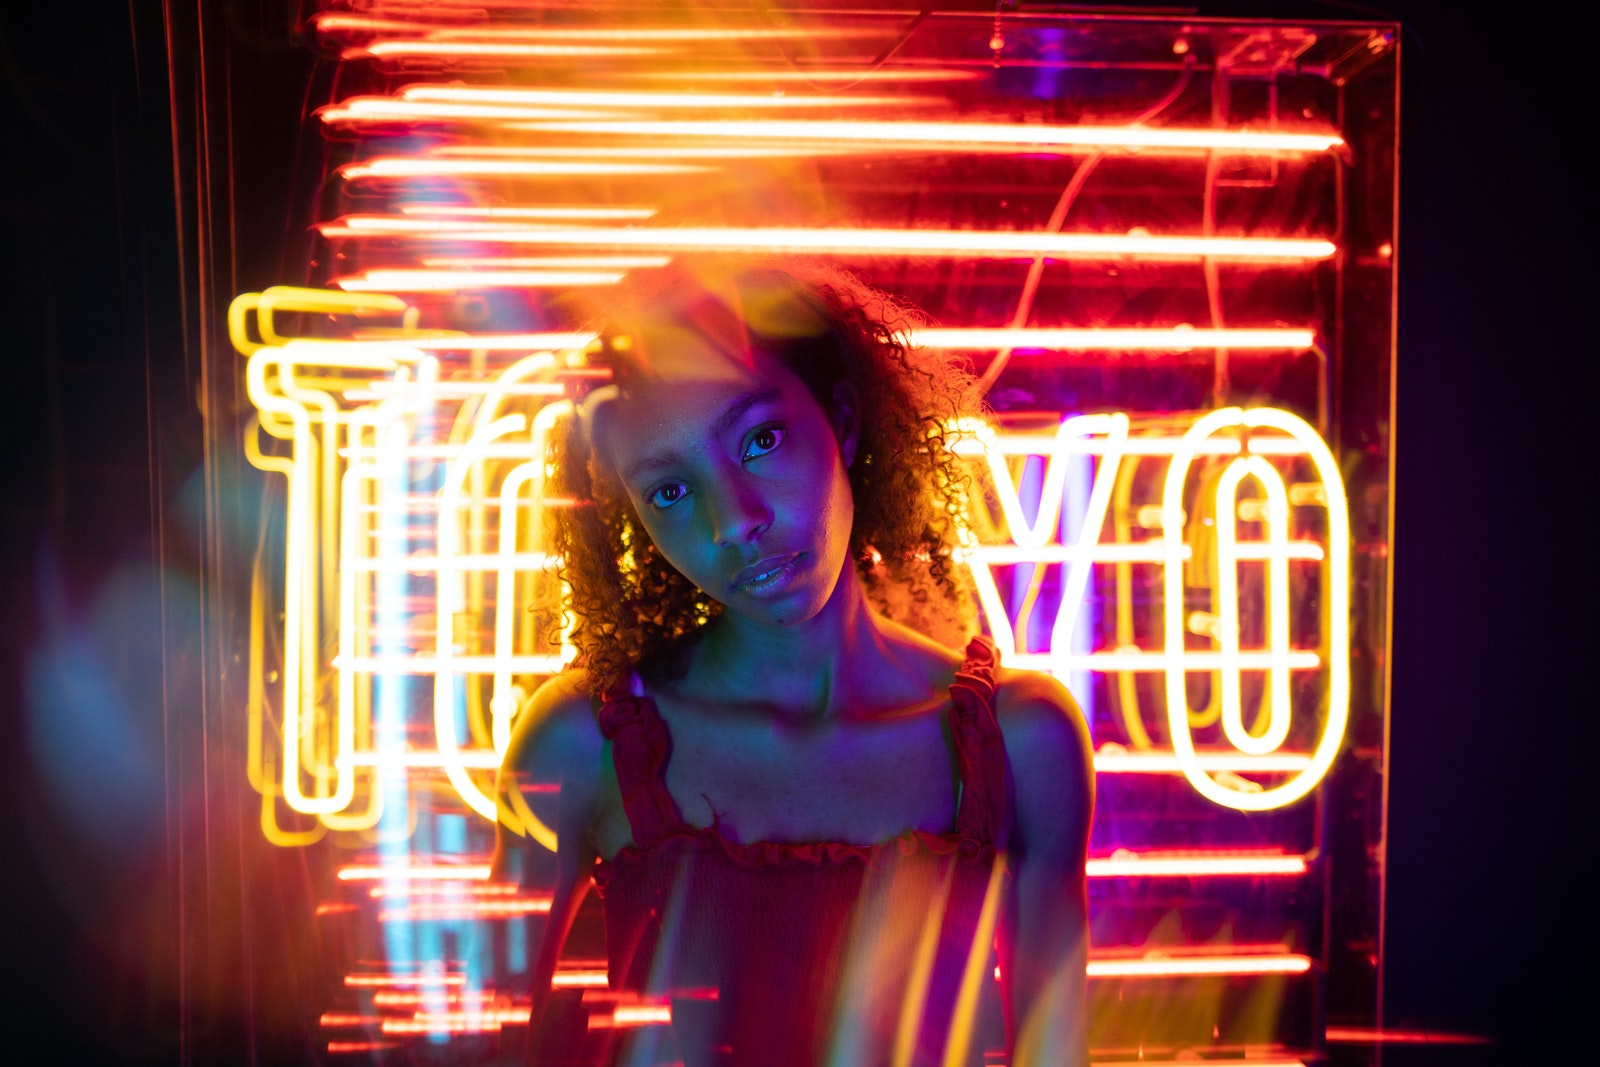 Photograph of a Girl with Curly Hair Near Neon Signs